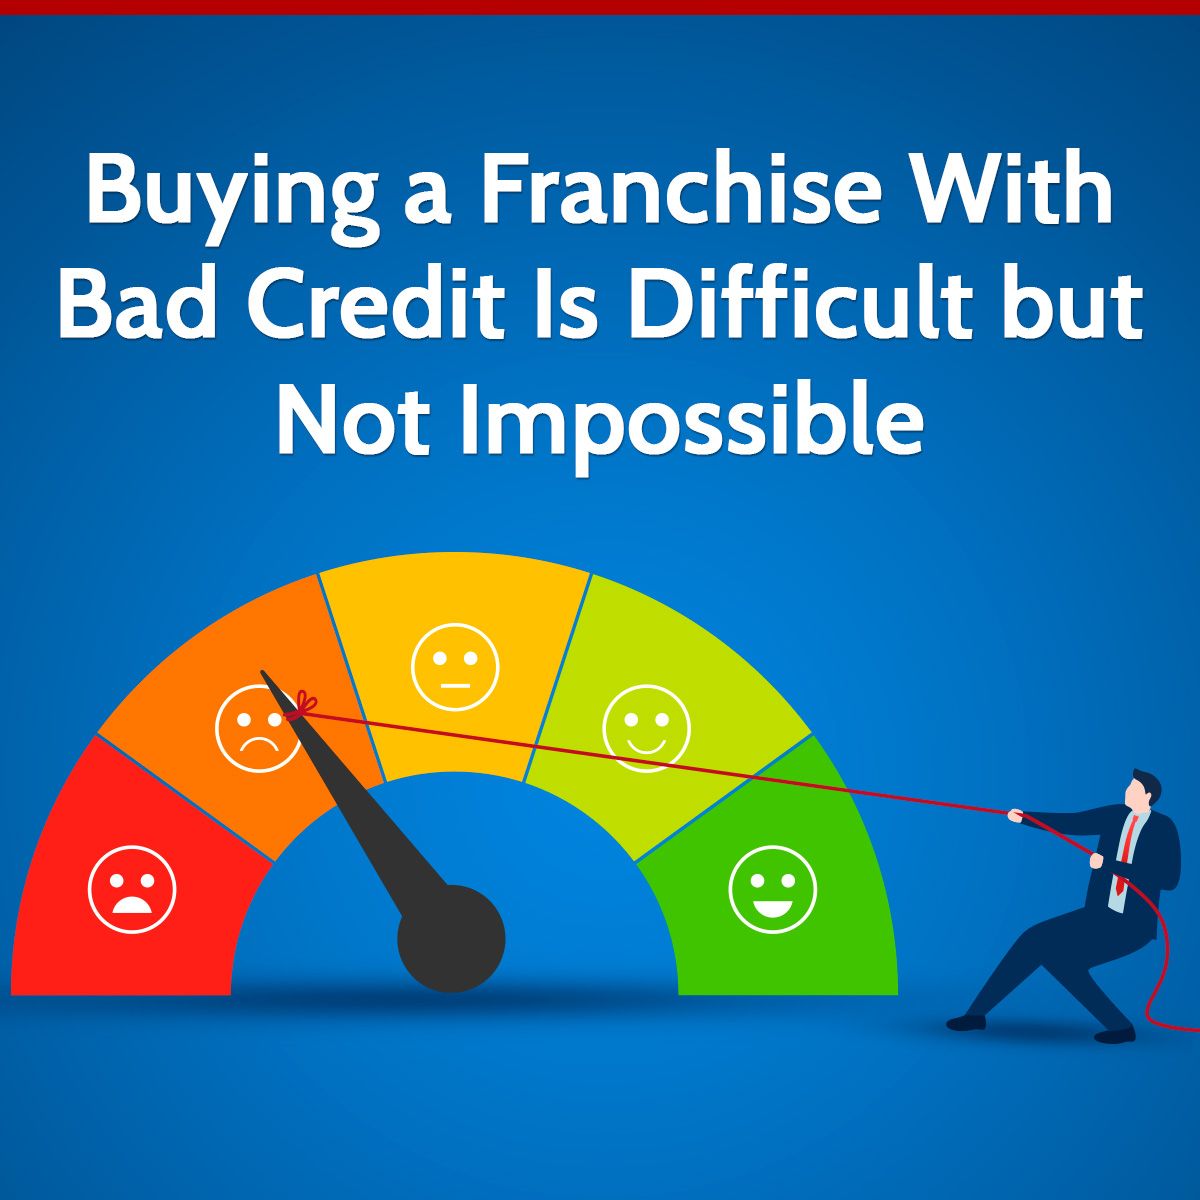 Buying a Franchise With Bad Credit Is Difficult but Not Impossible